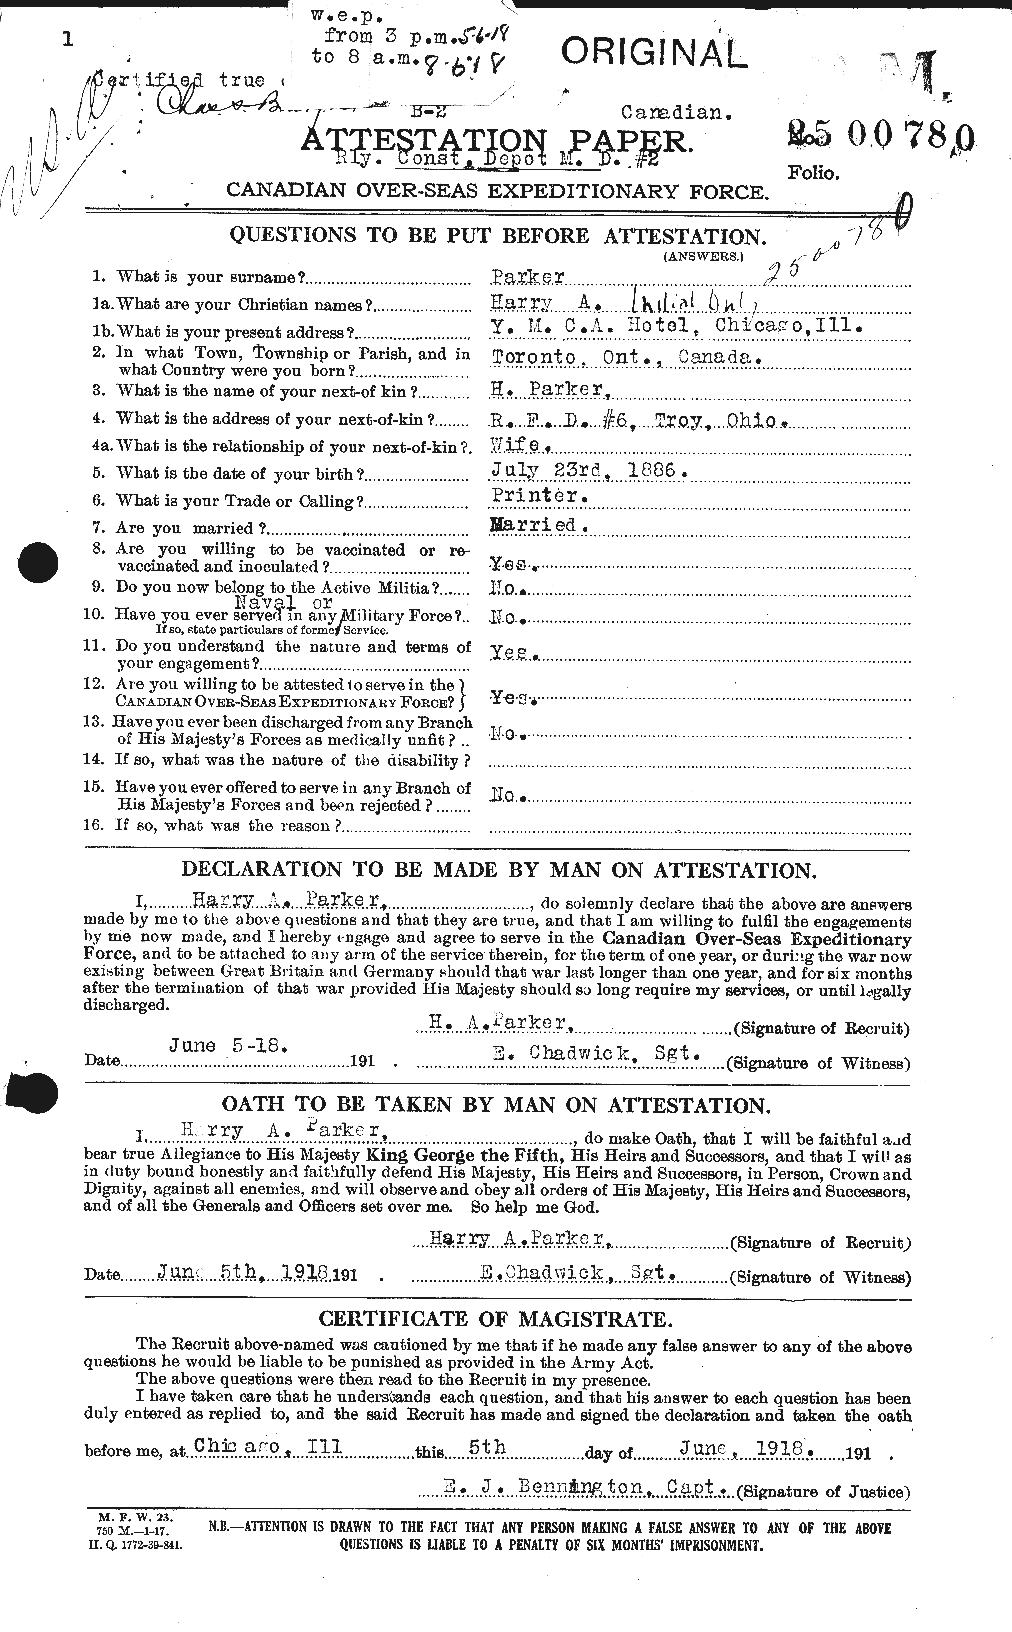 Personnel Records of the First World War - CEF 565327a